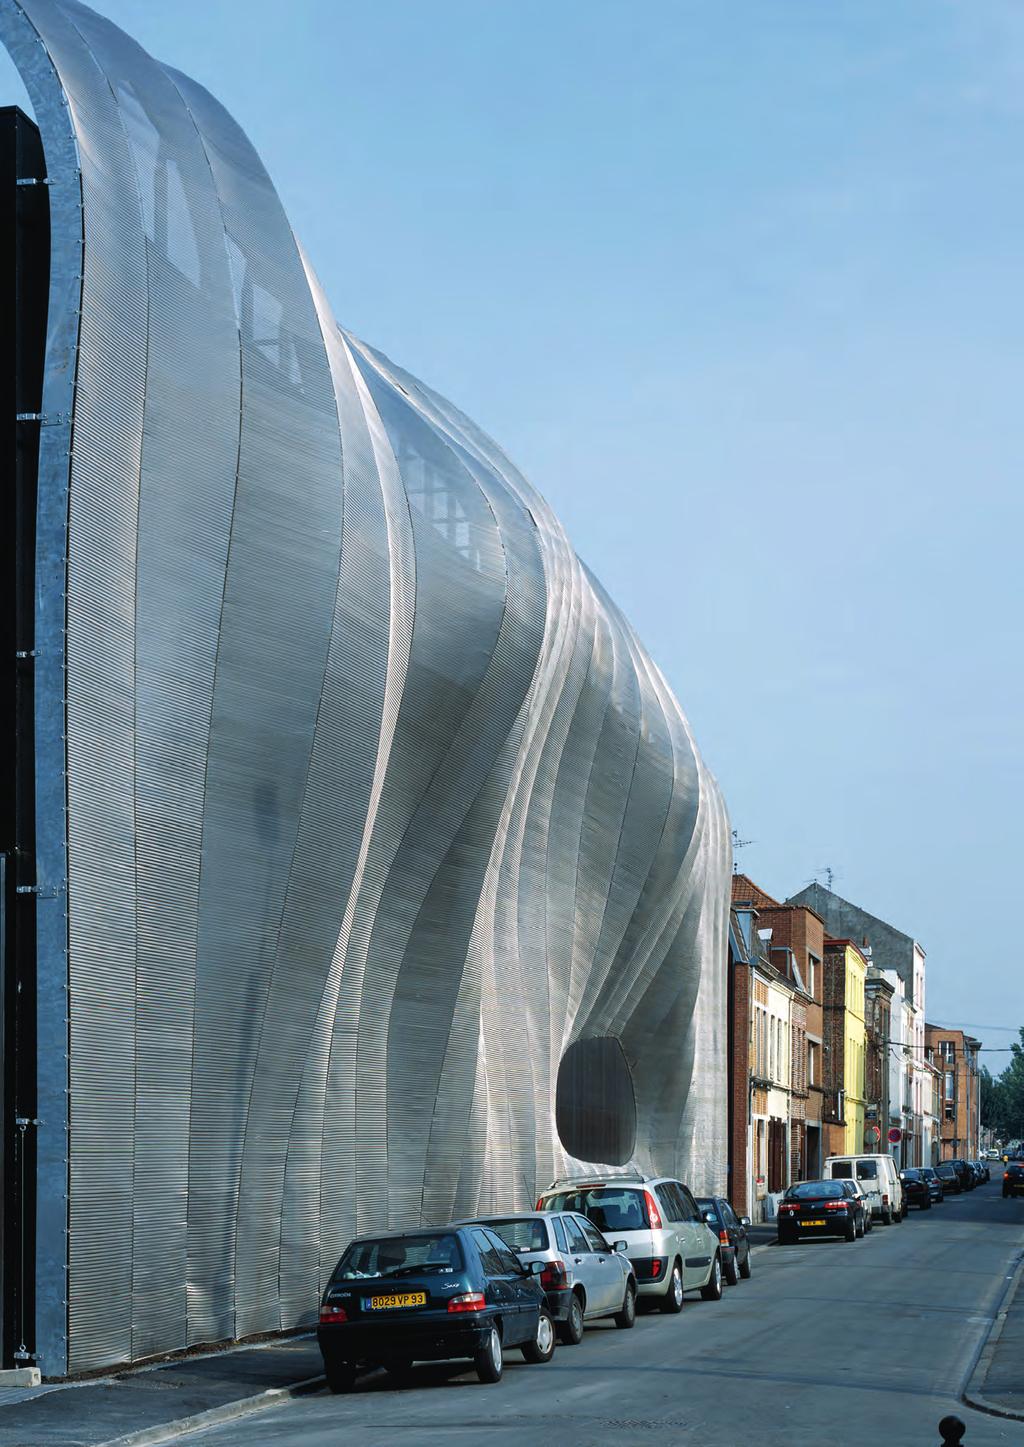 The architect was able to transform a rectangular building with stainless